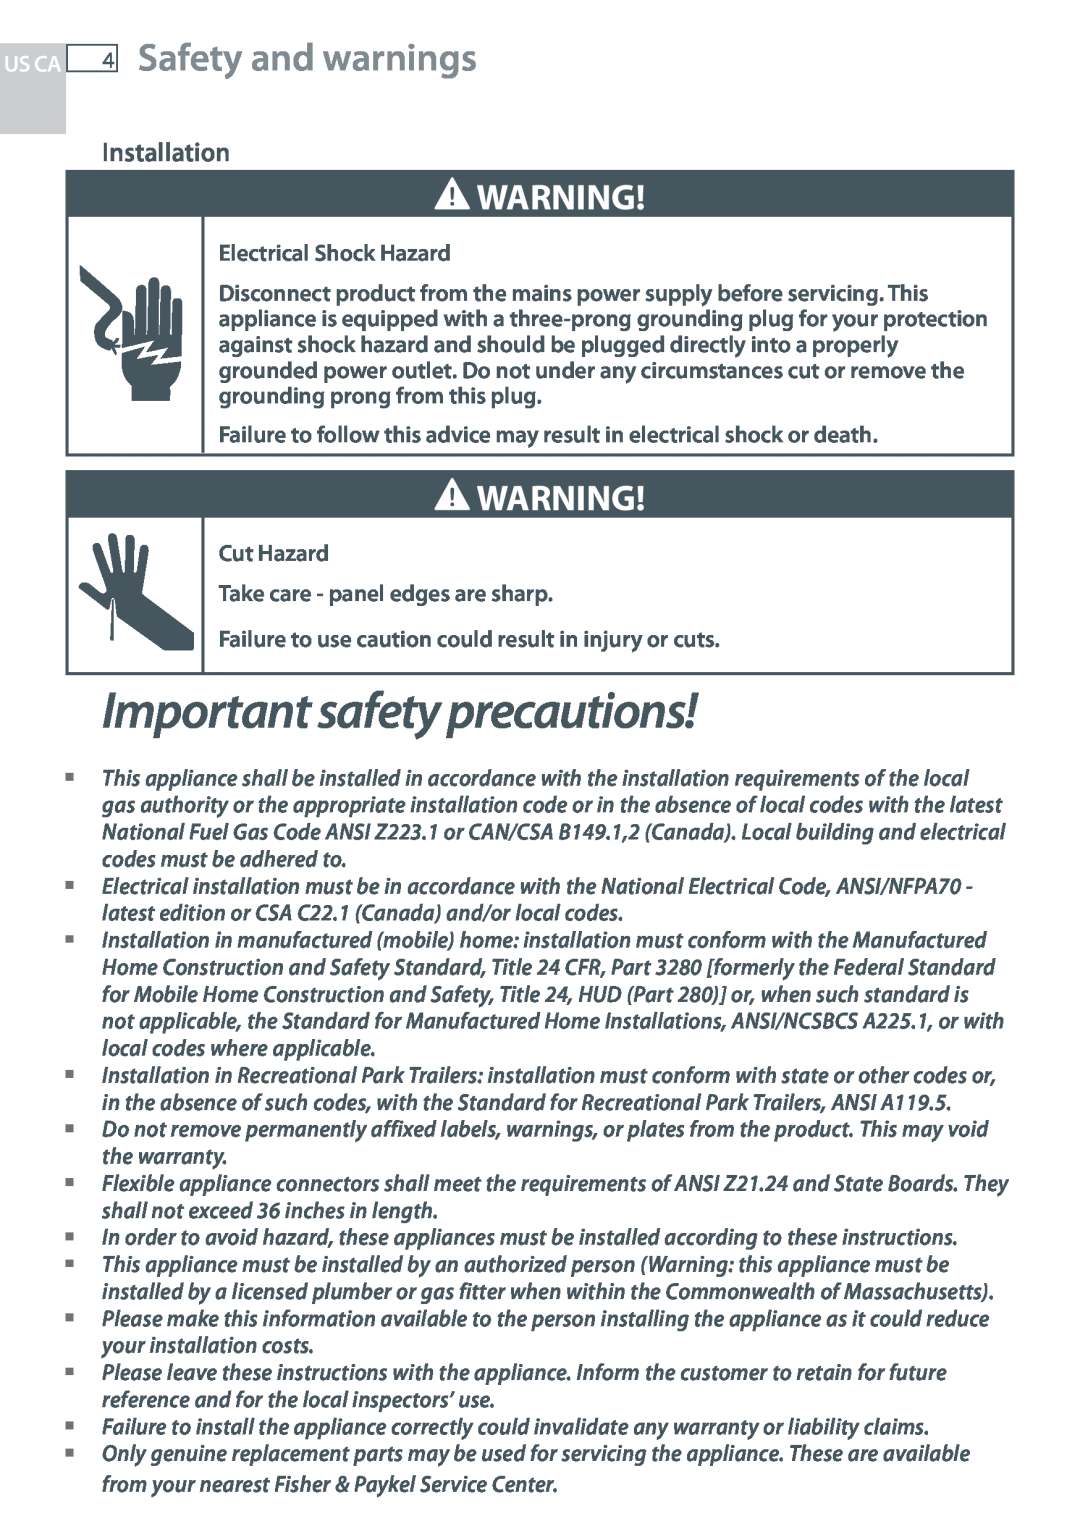 Fisher & Paykel CG244 Important safety precautions, 4Safety and warnings, Installation, Us Ca, Electrical Shock Hazard 